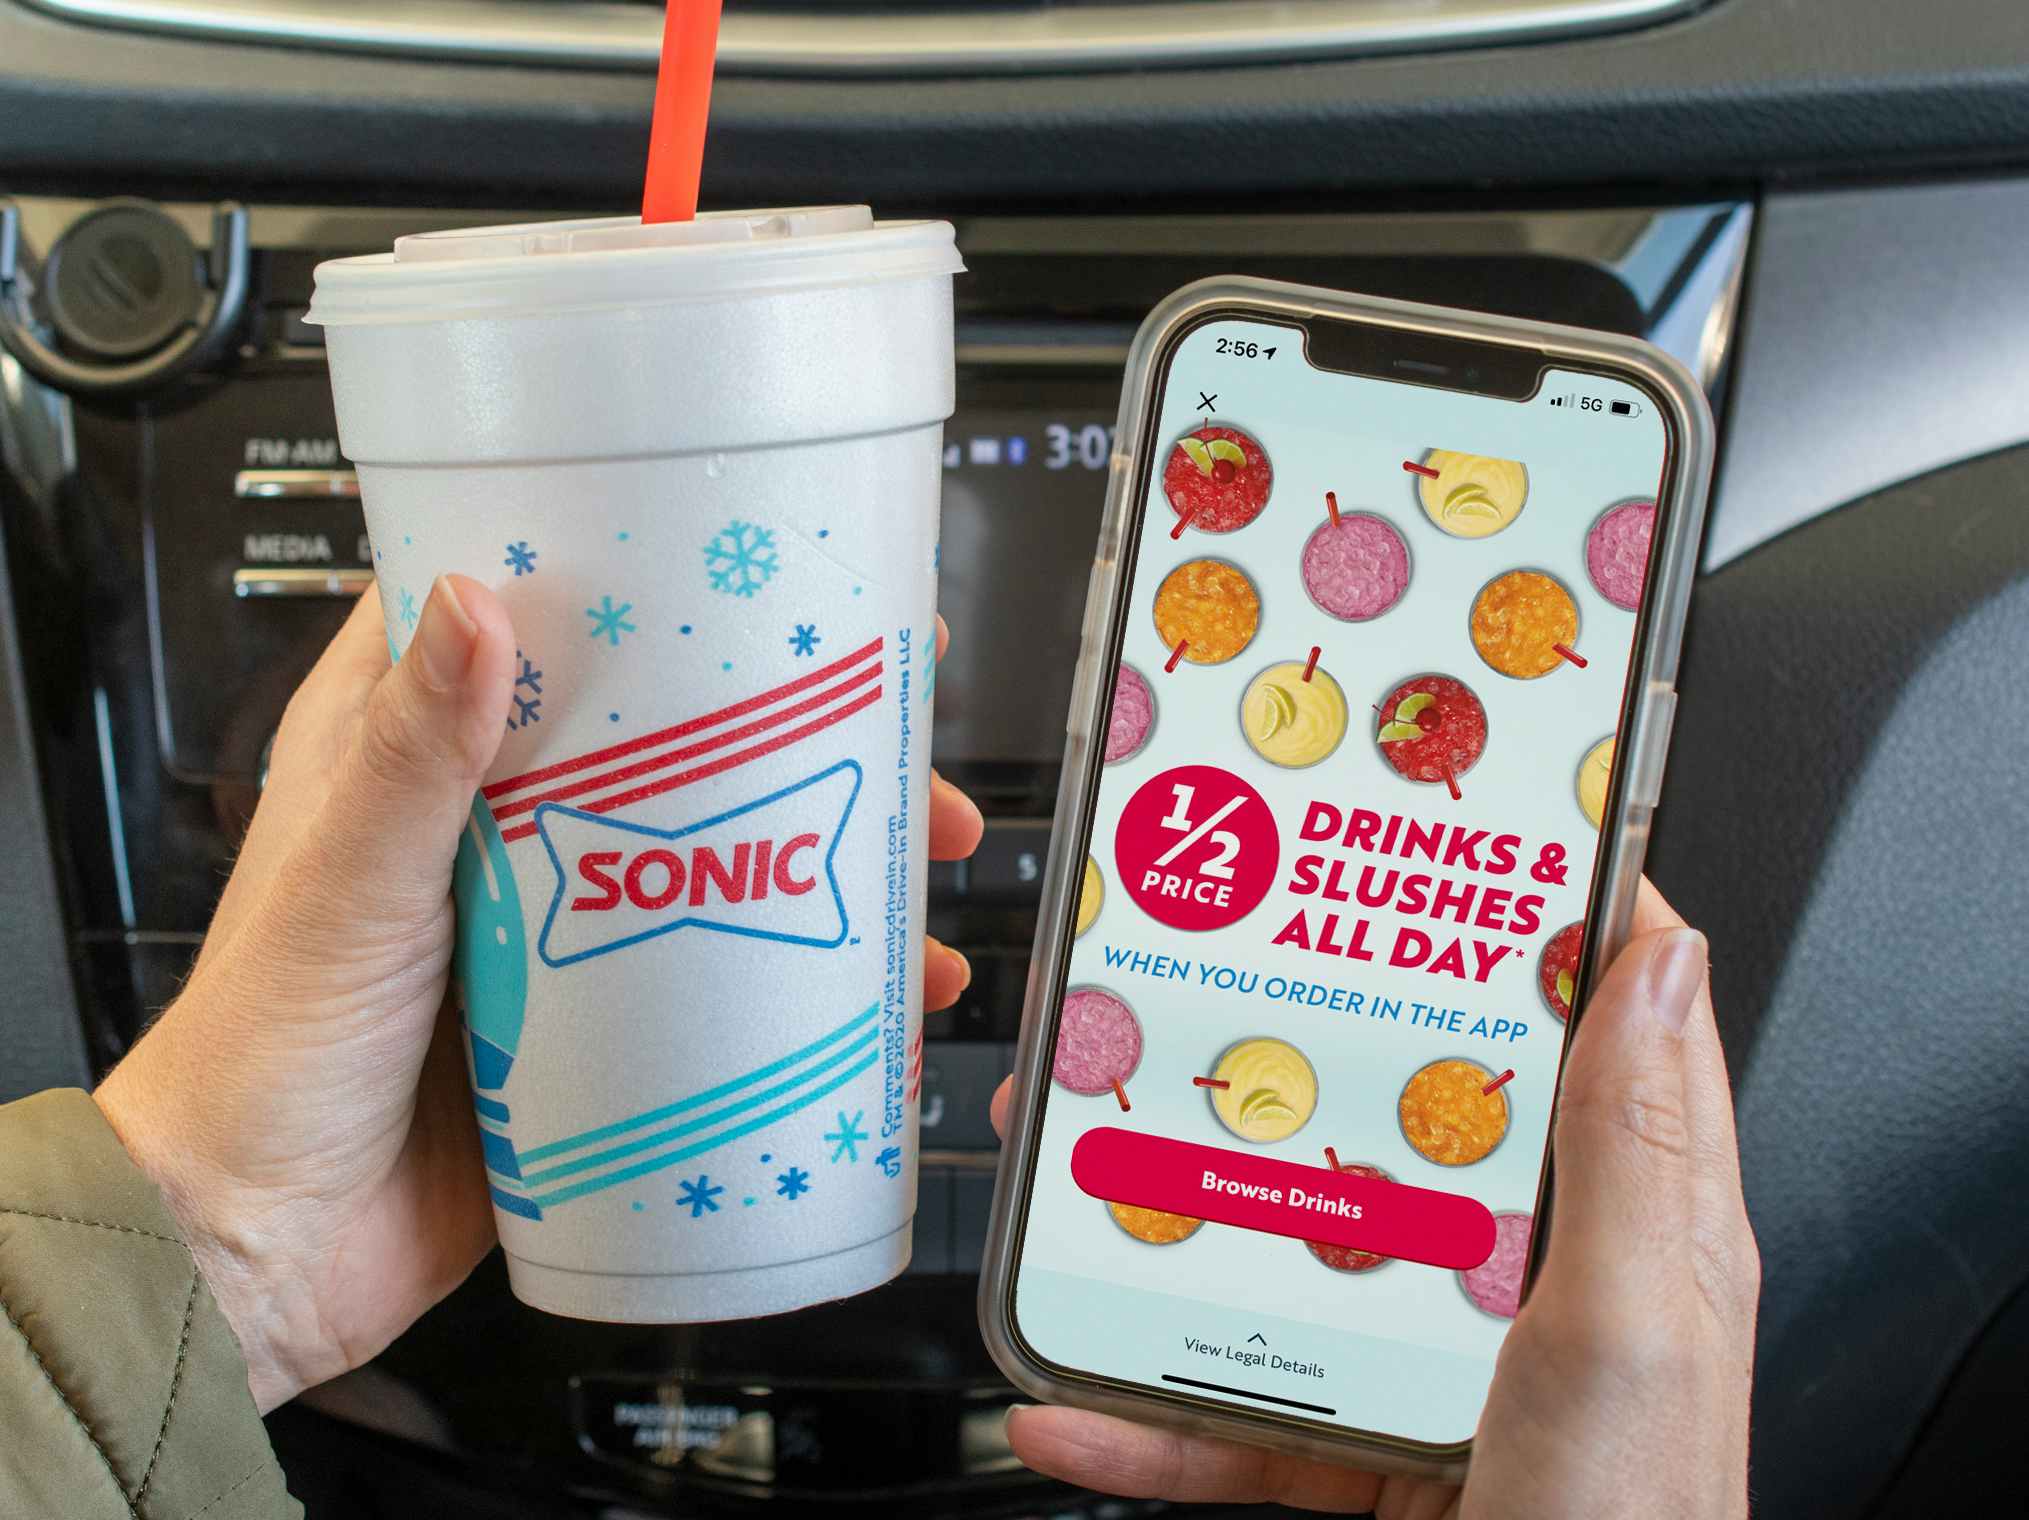 "1/2 drinks and slushes all day" ad inside the Sonic app on a cell phone, next to a sonic cup.